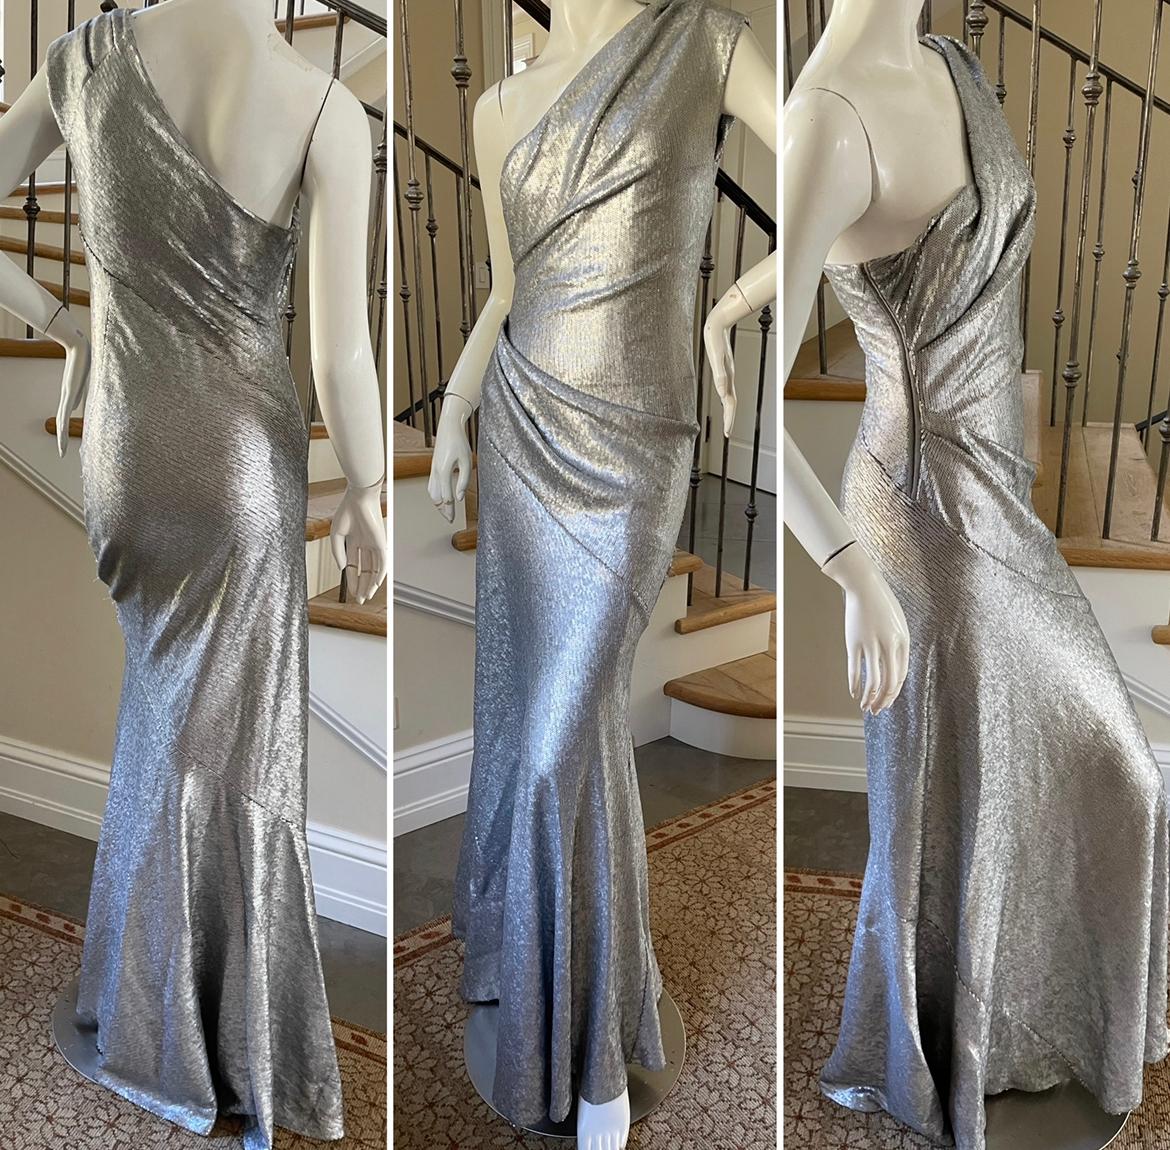 Donna Karan Vintage Matte Silver Sequin One Shoulder Evening Dress

This is so pretty. There is a lot of stretch.
Size 4
Bust 34